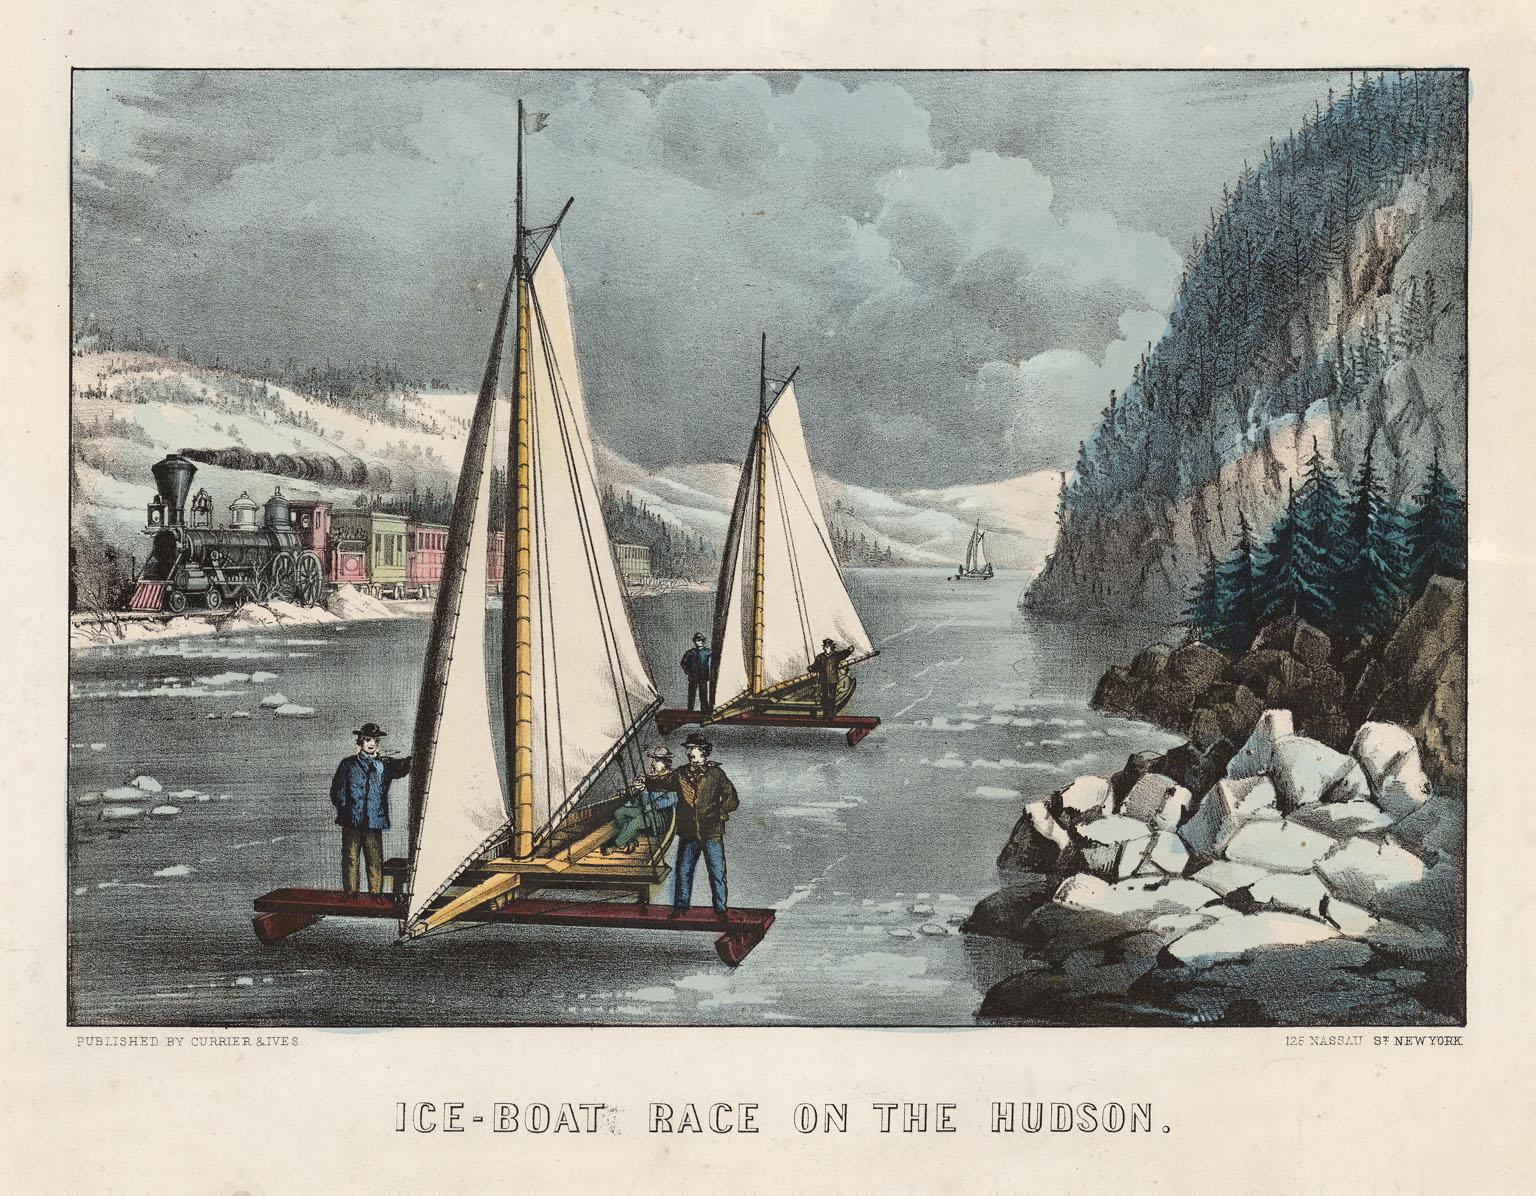 Currier & Ives Landscape Print - Ice-Boat Race on the Hudson.